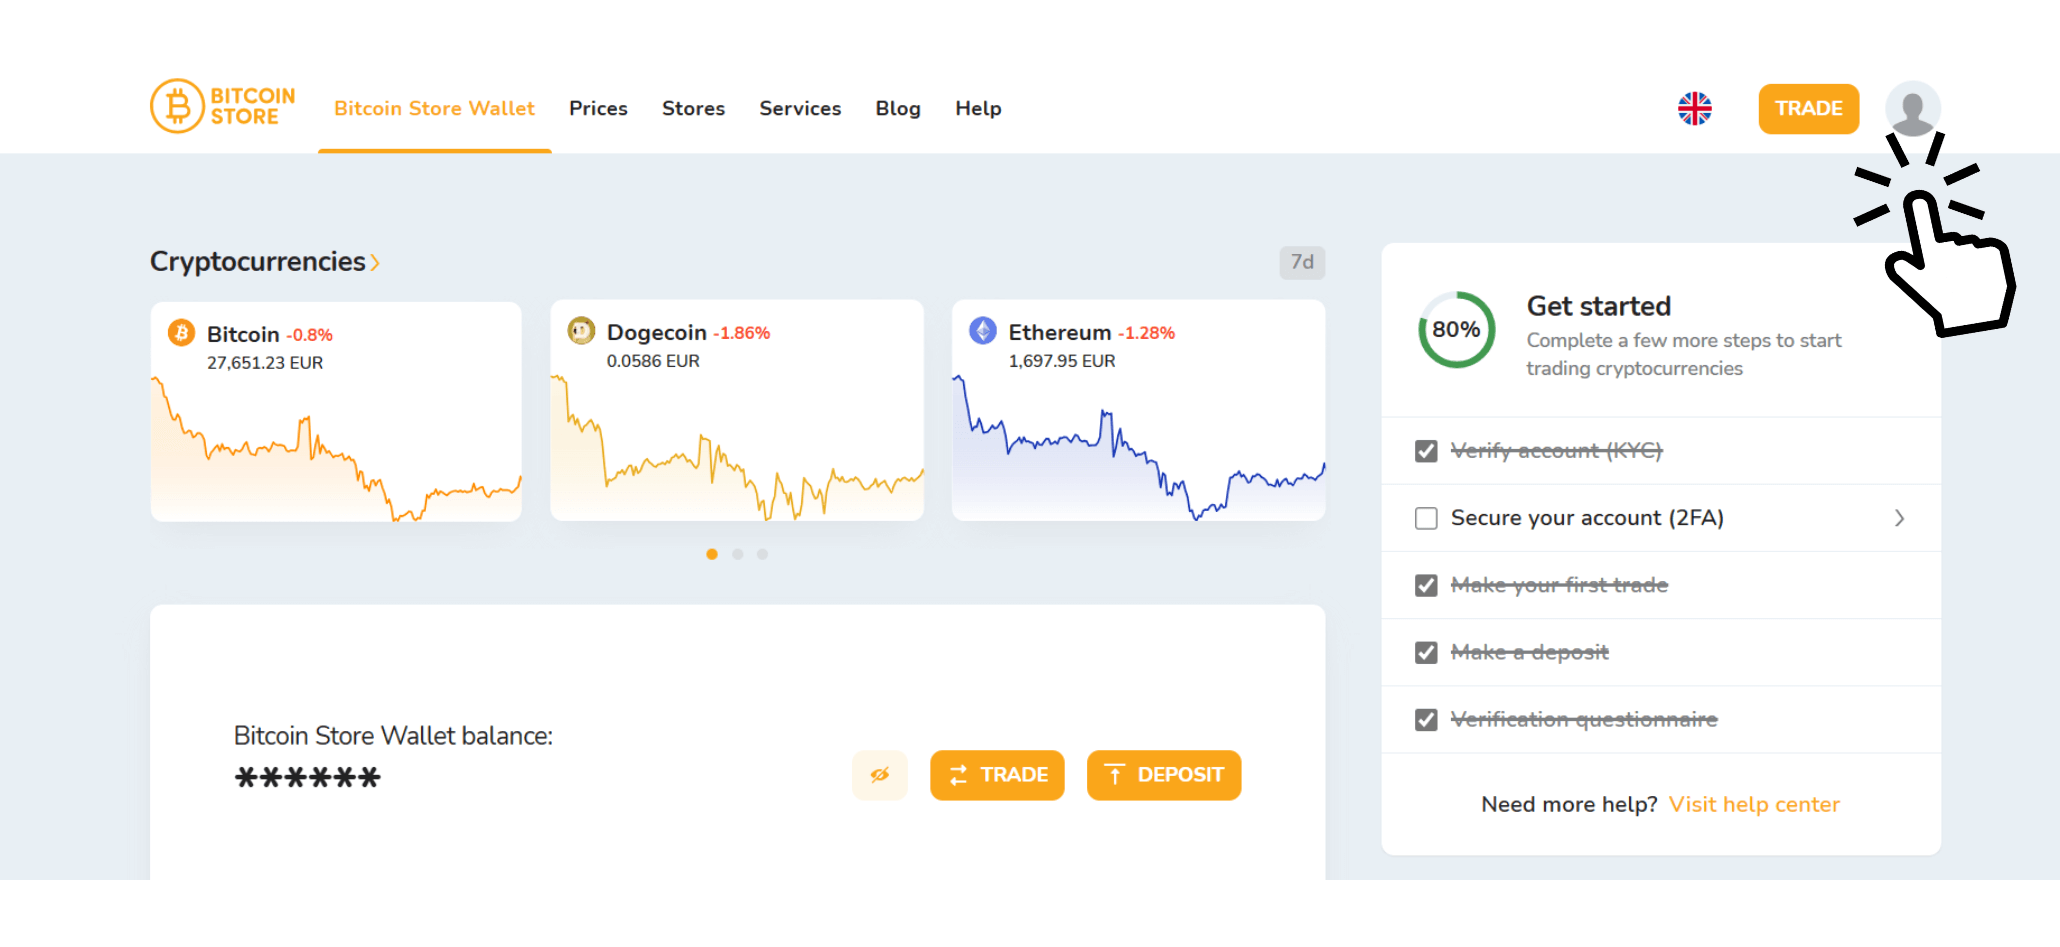 A screenshot of the Bitcoin Store Wallet app shows how to pay smaller fees when trading cryptocurrencies.